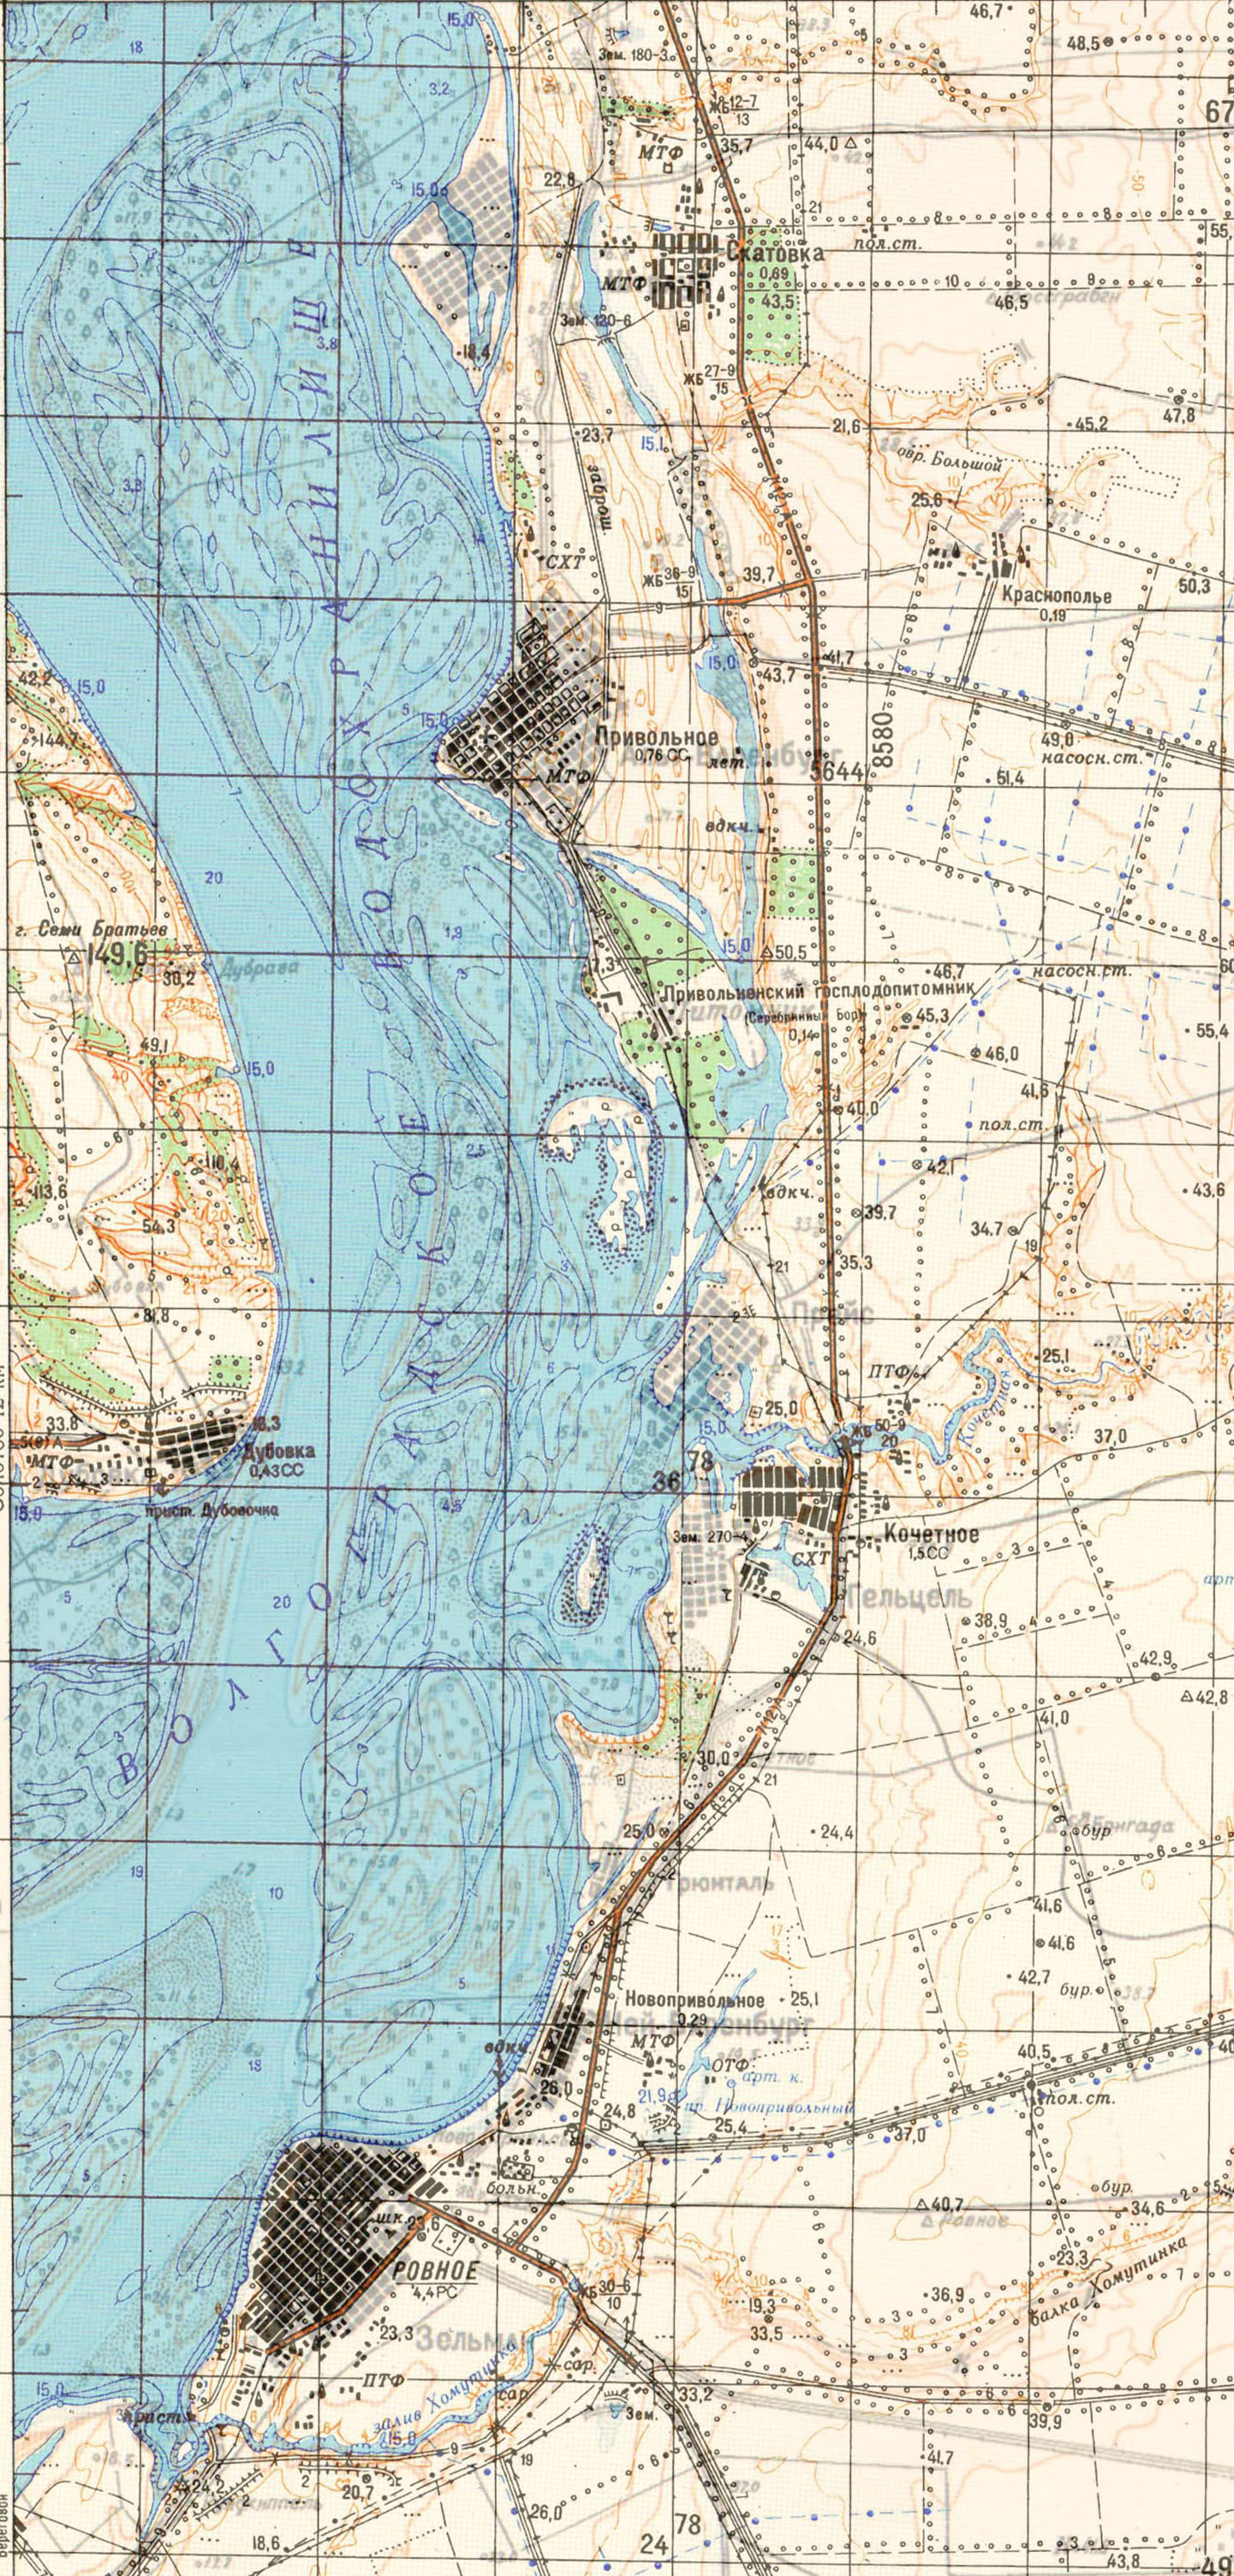 This map overlays several maps that show the location of Straub (top) before and after the inundation of the Volga Reservoir in 1961. Source: Vladimir Kakorin.